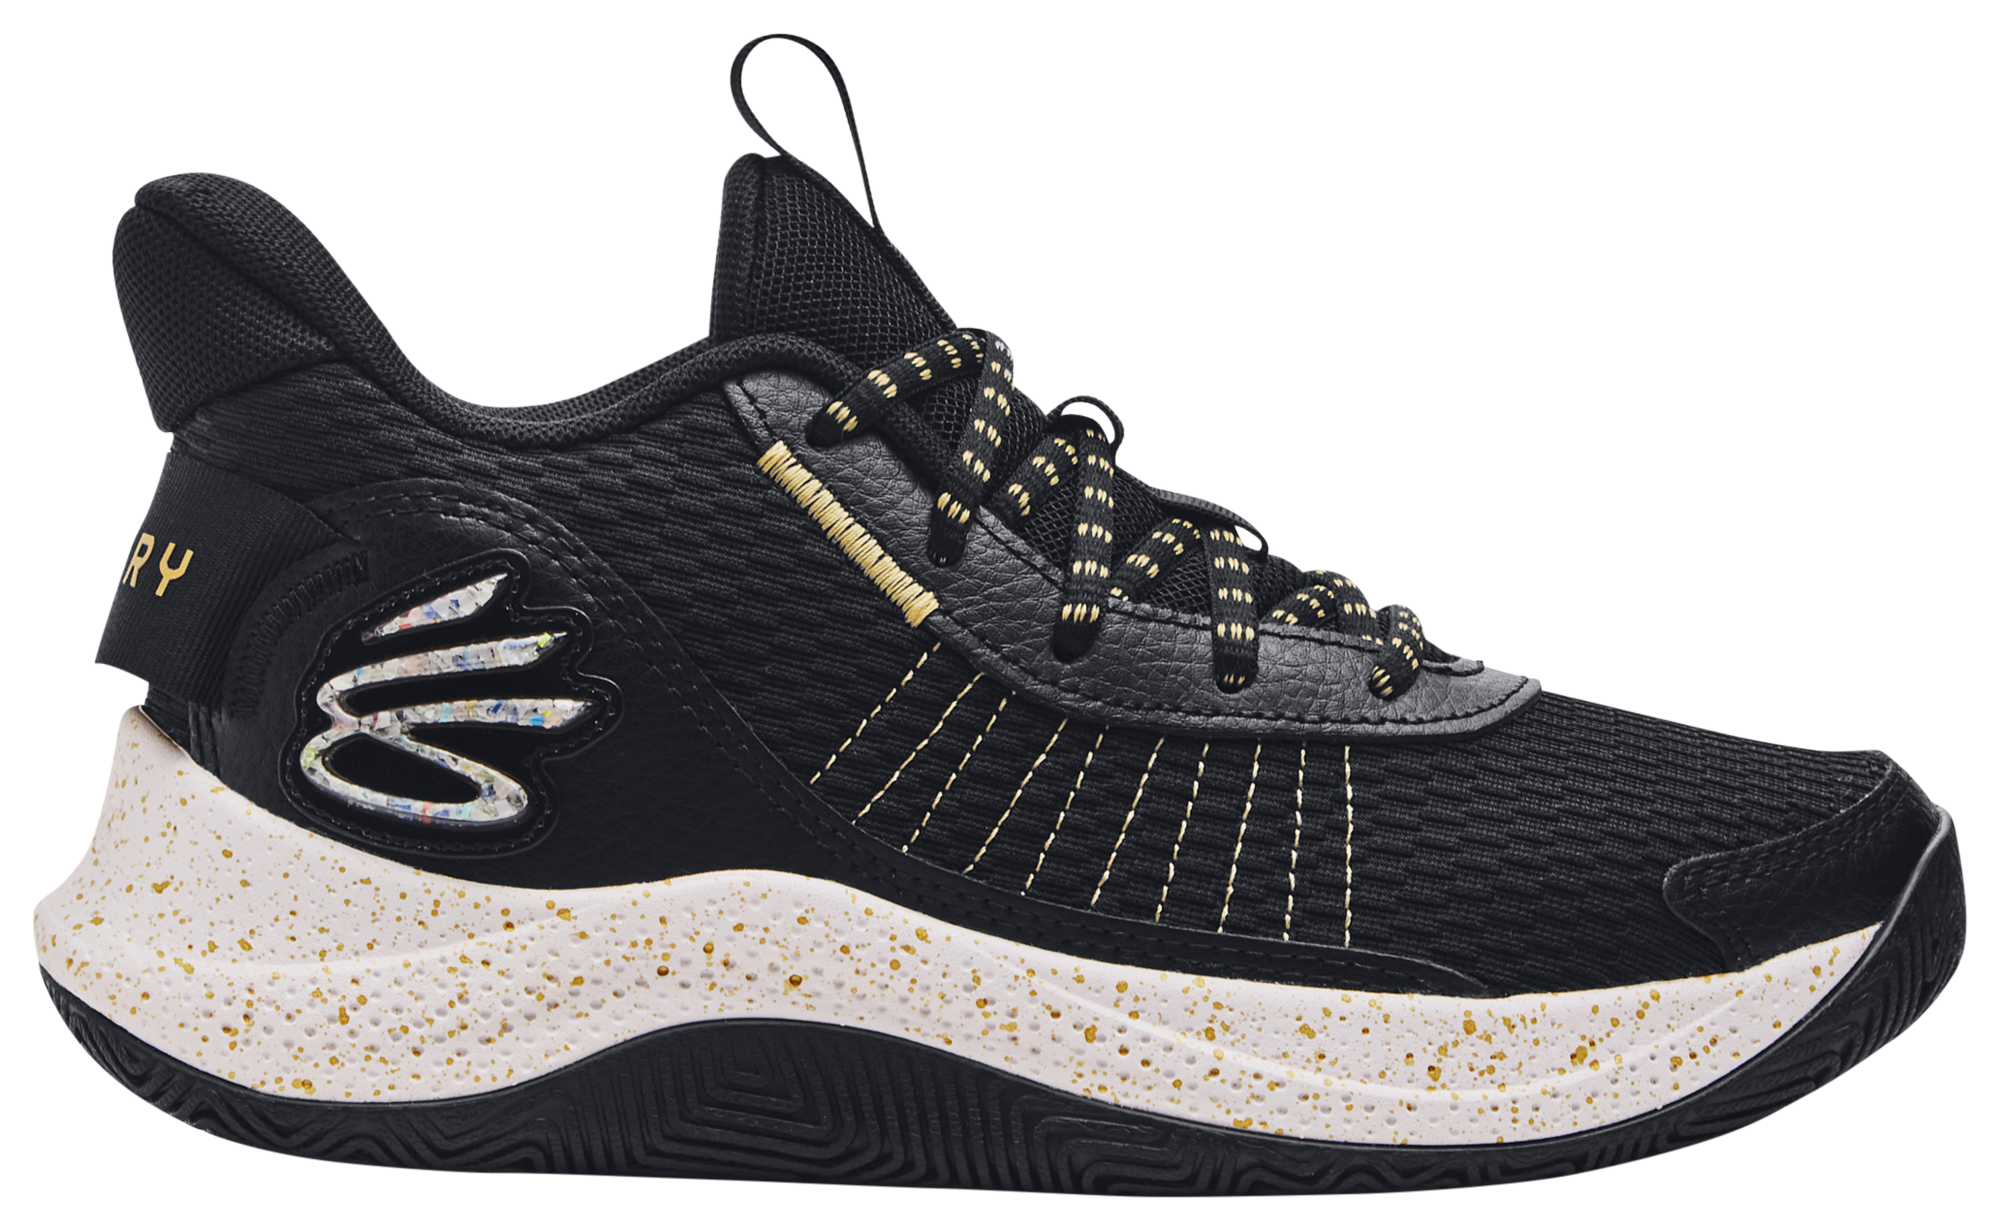 Under Armour Curry 3Z7